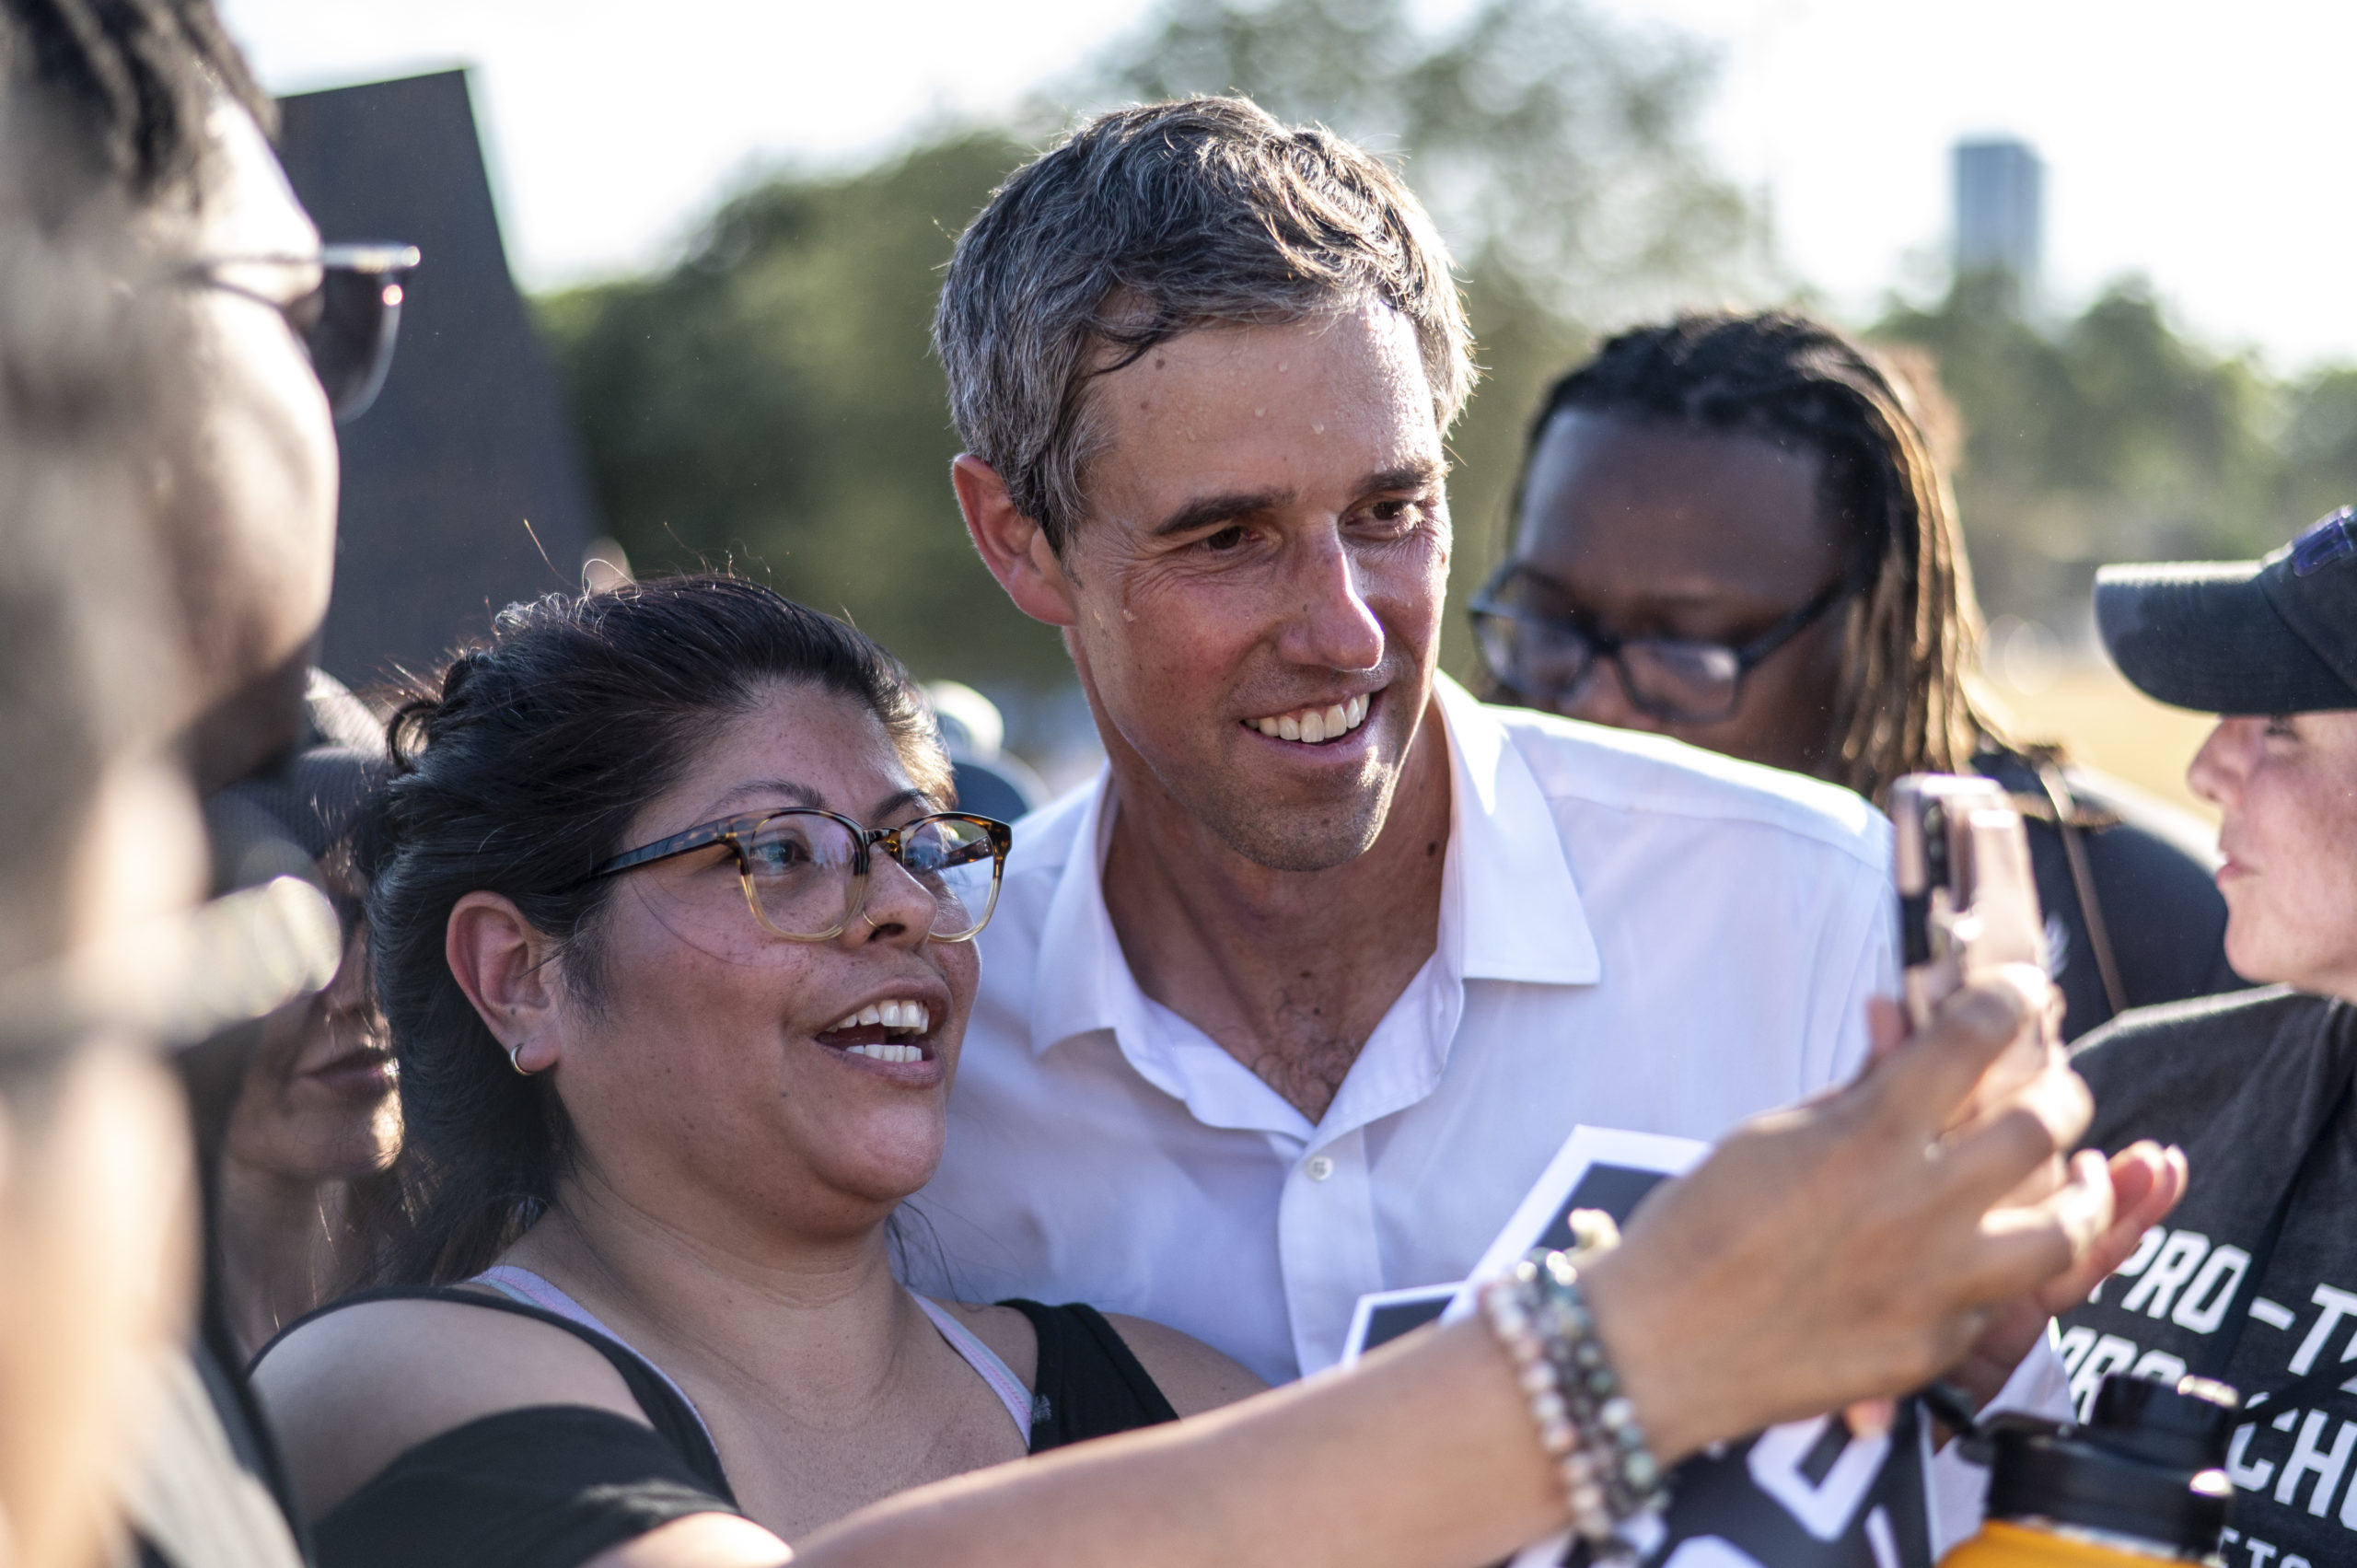 AUSTIN, TX - JUNE 26: Democratic gubernatorial candidate Beto O'Rourke takes a photo with a supporter after a speech at Pan American Neighborhood Park on June 26, 2022 in Austin, Texas. O'Rourke held the event after public backlash to the overturning of Roe V Wade which led to a trigger ban on all abortions in the state of Texas with no exceptions for rape or incest. (Photo by Sergio Flores/Getty Images)